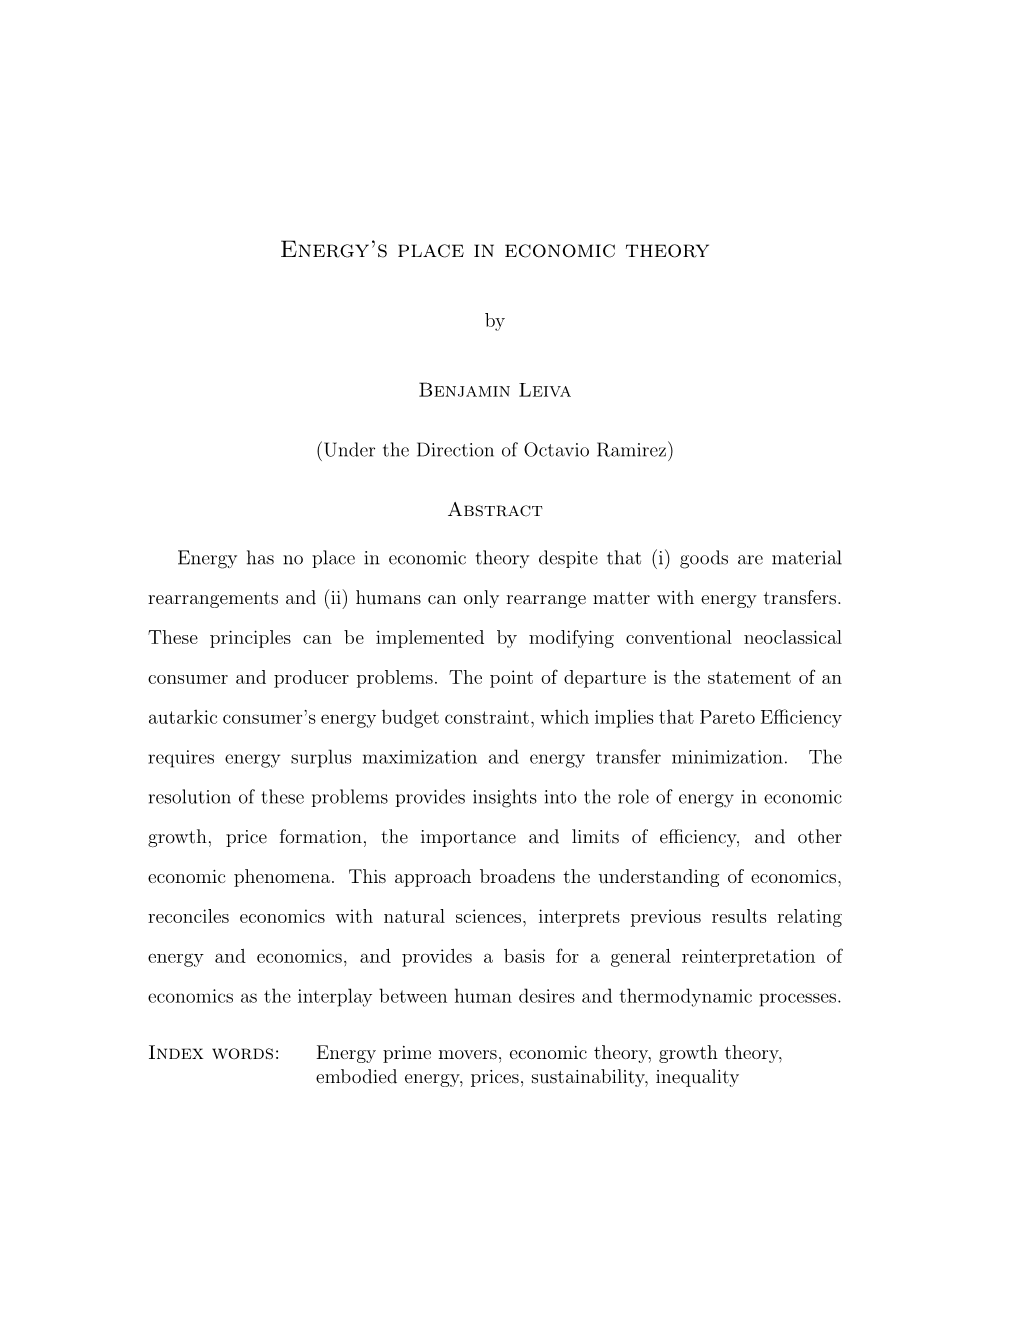 Energy's Place in Economic Theory